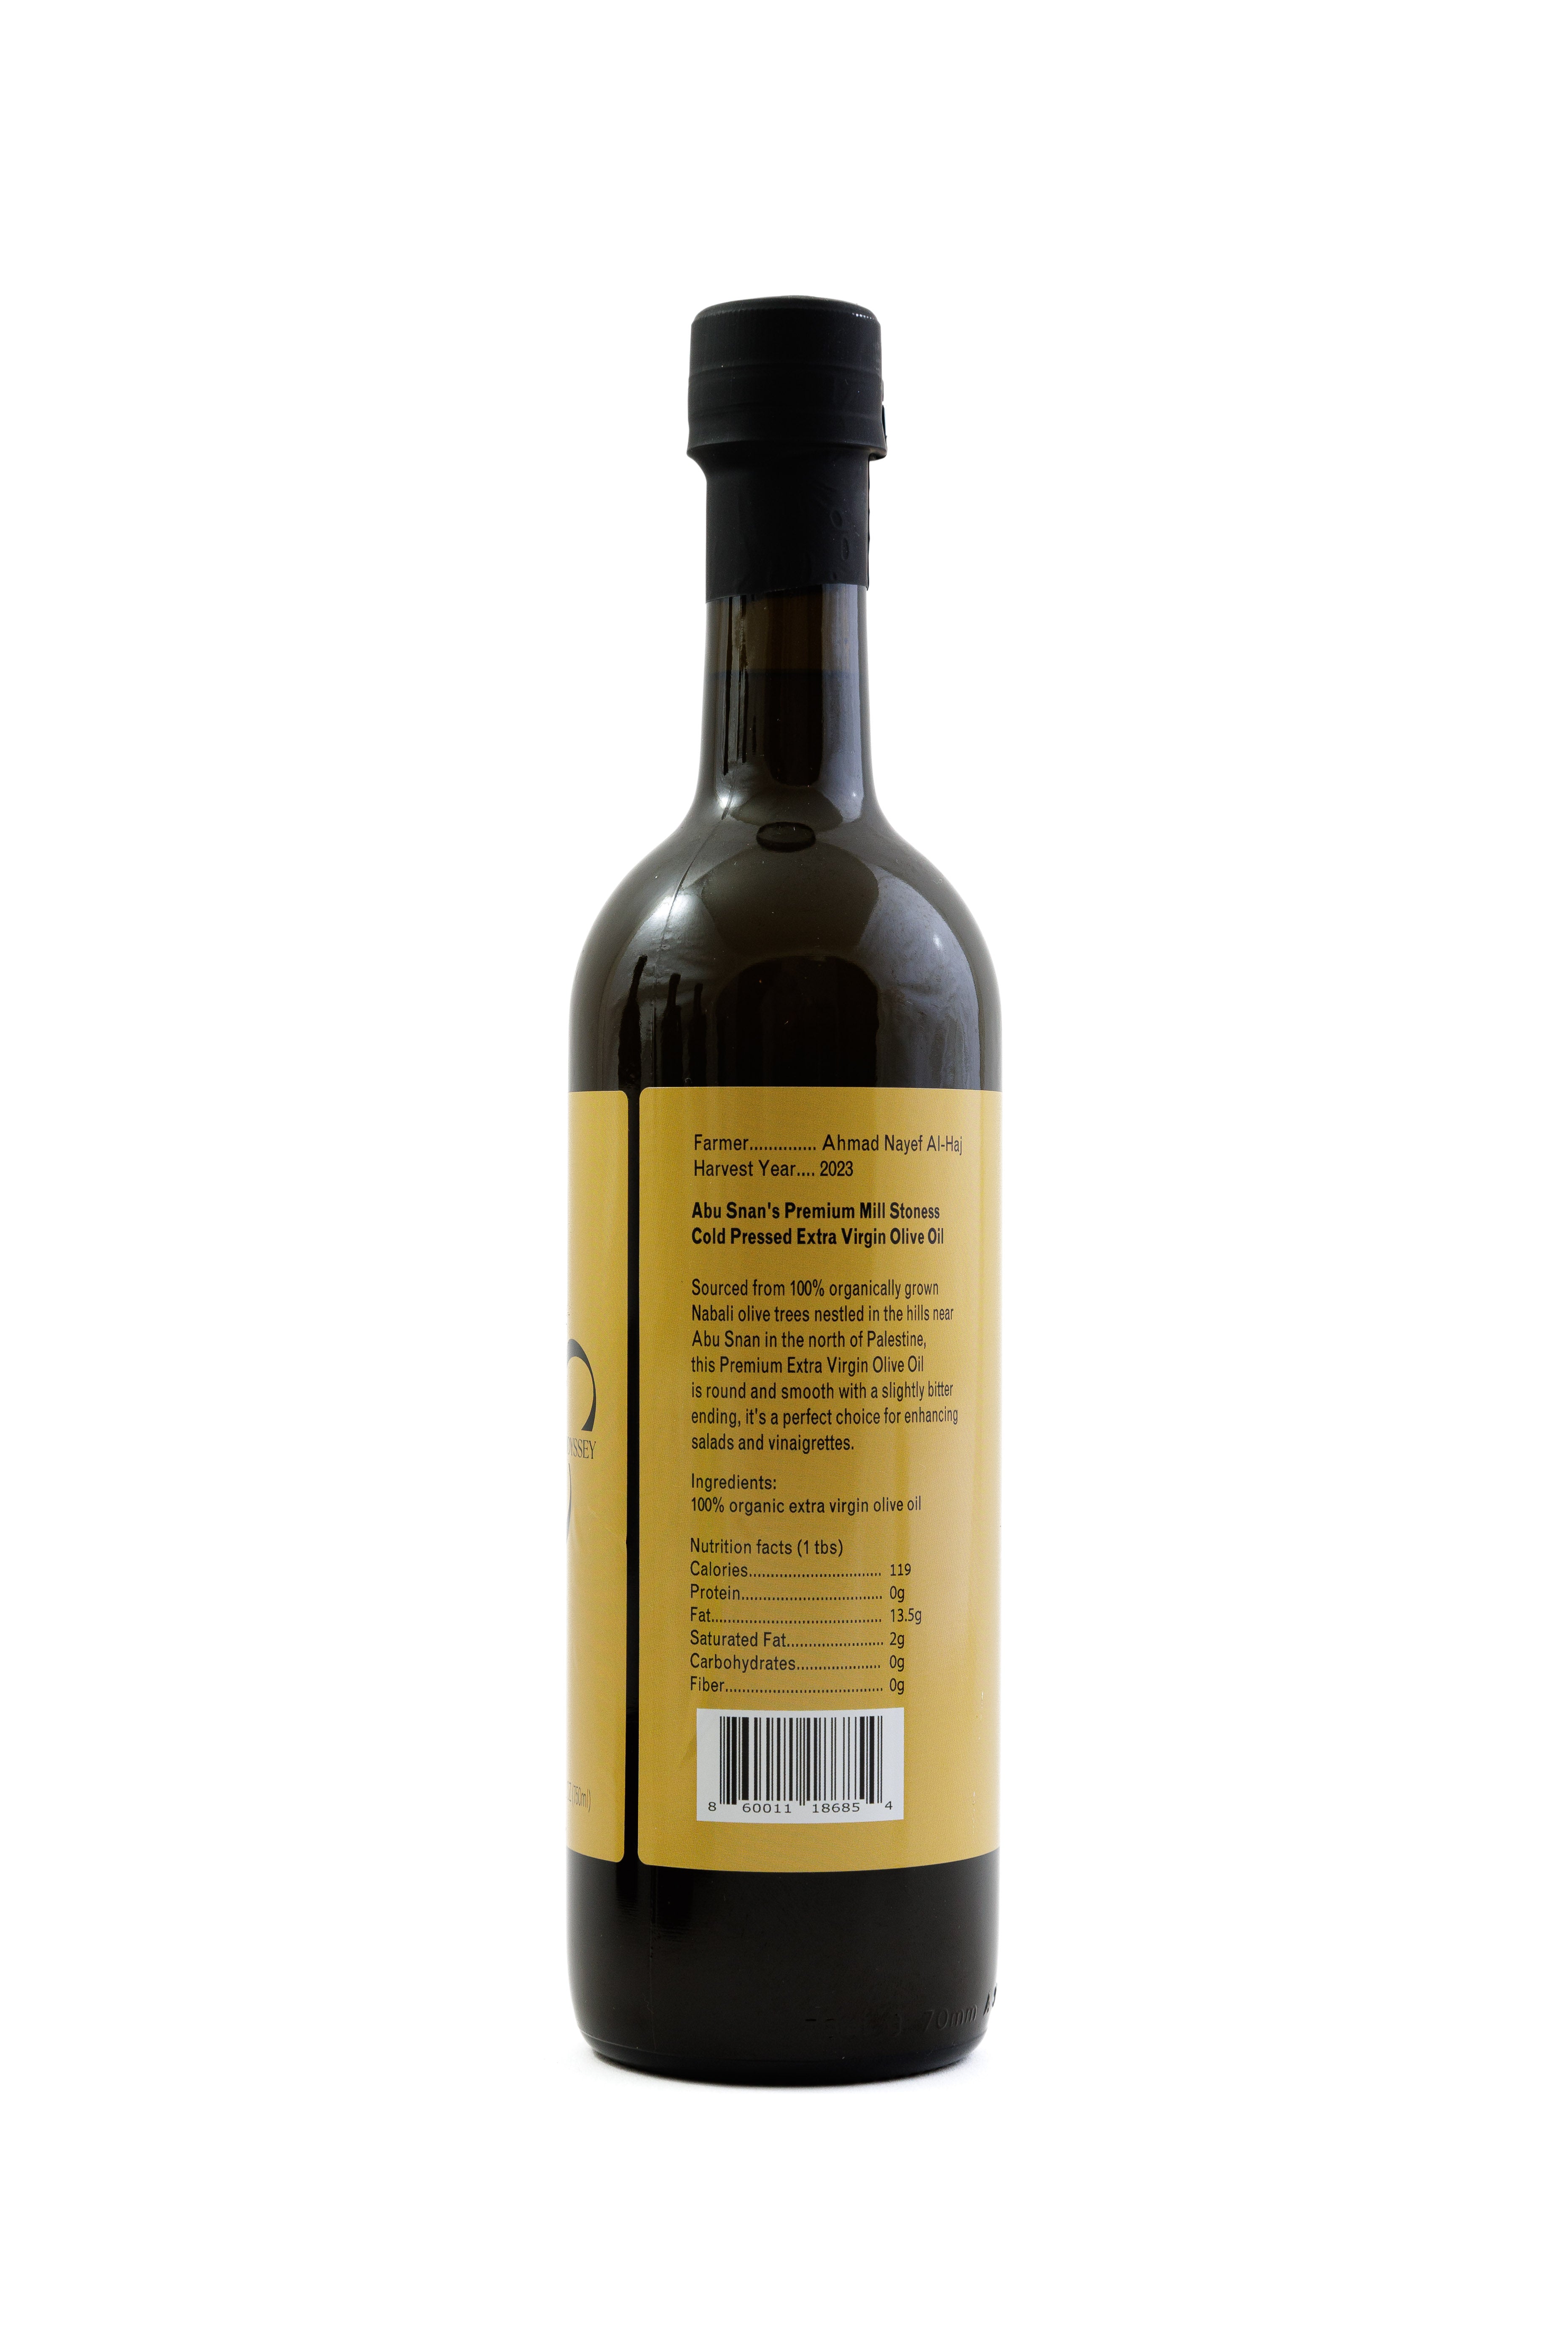 Abu Snan's Millstone Extracted Olive Oil - Smooth, Zesty, and Full Body [Harvest Year: 2023]